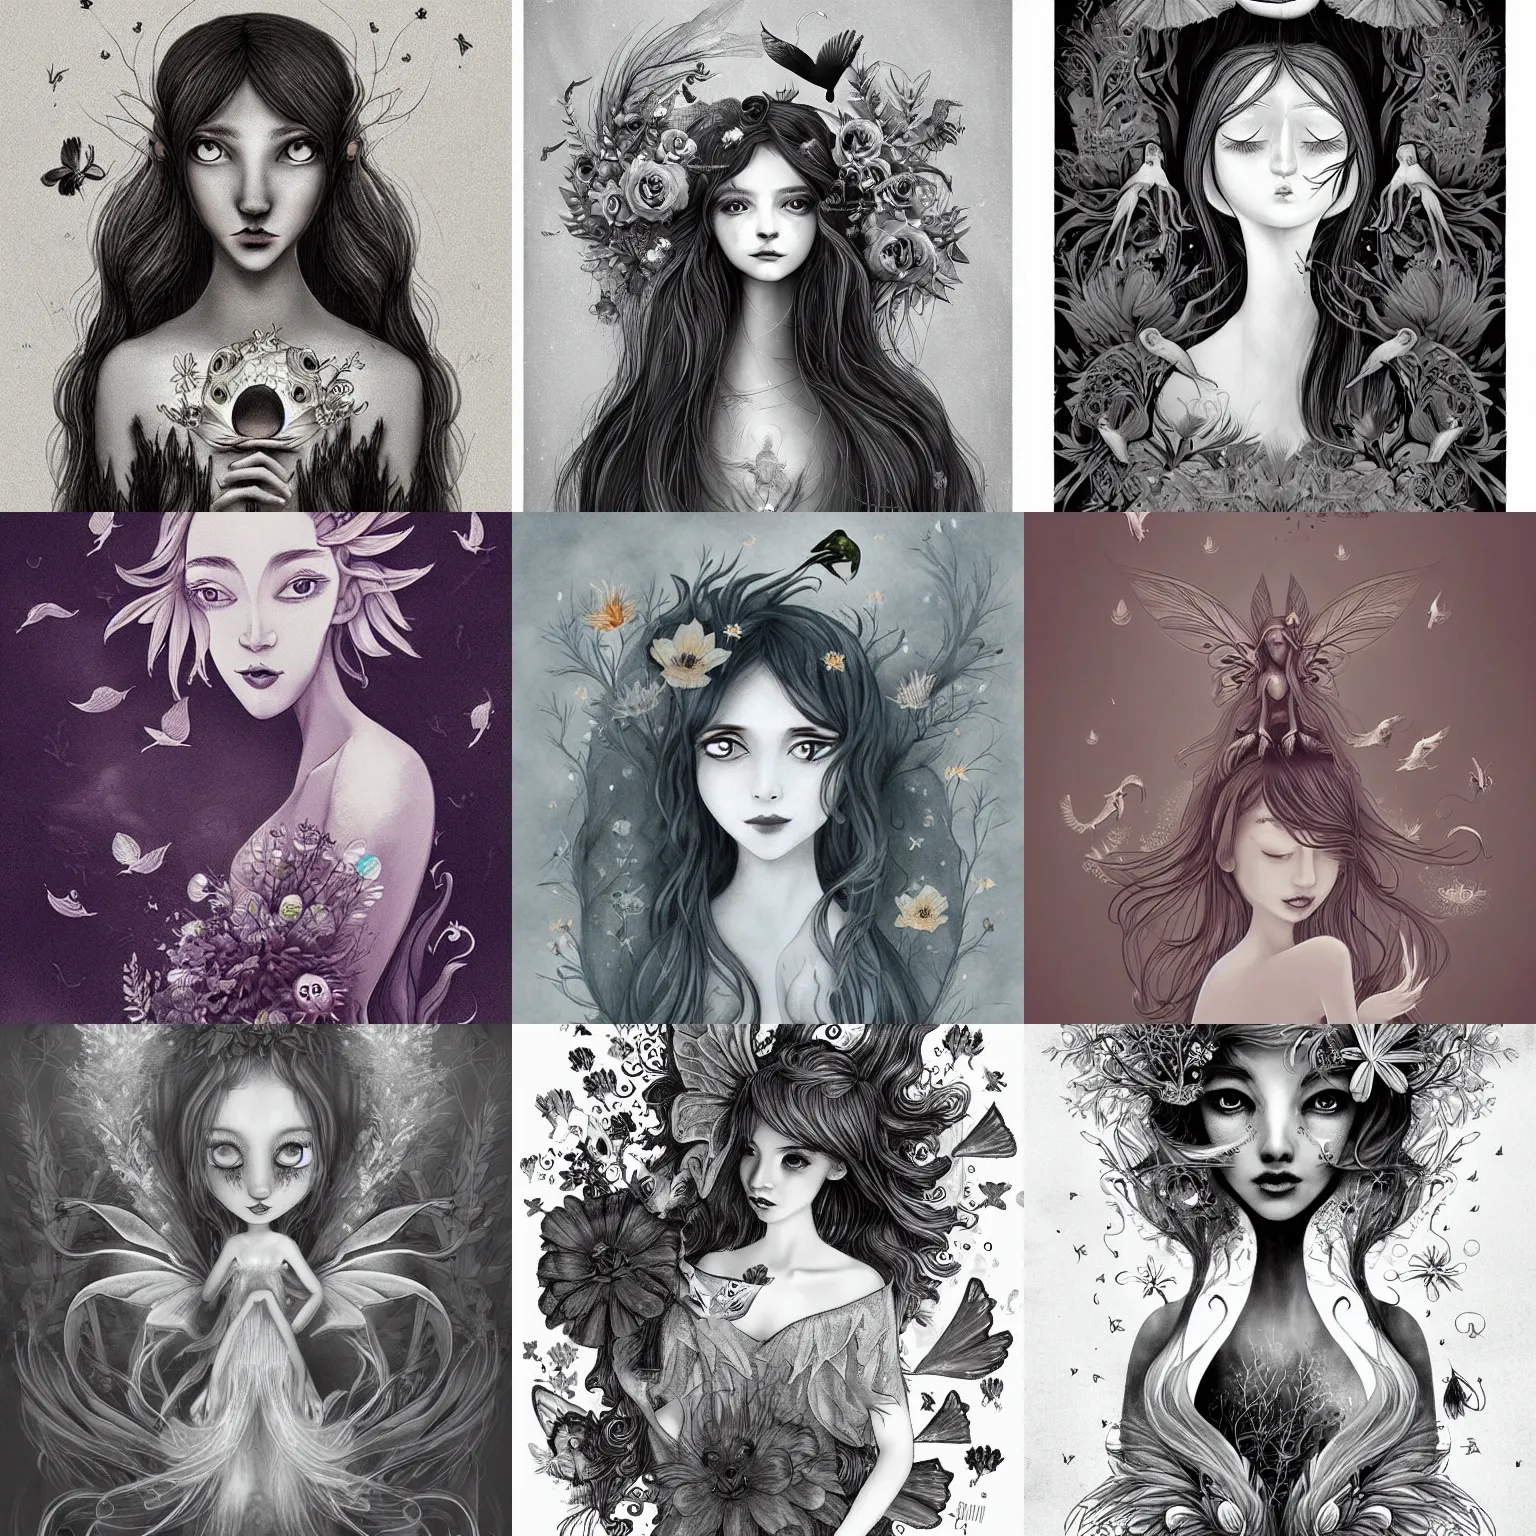 Prompt: magical illustrations of ethereal fantasy creatures, beautiful fairies, mermaids and female portraits with flowers, whimsical big - eyed characters accompanied by animals and birds, greyscale, negative space